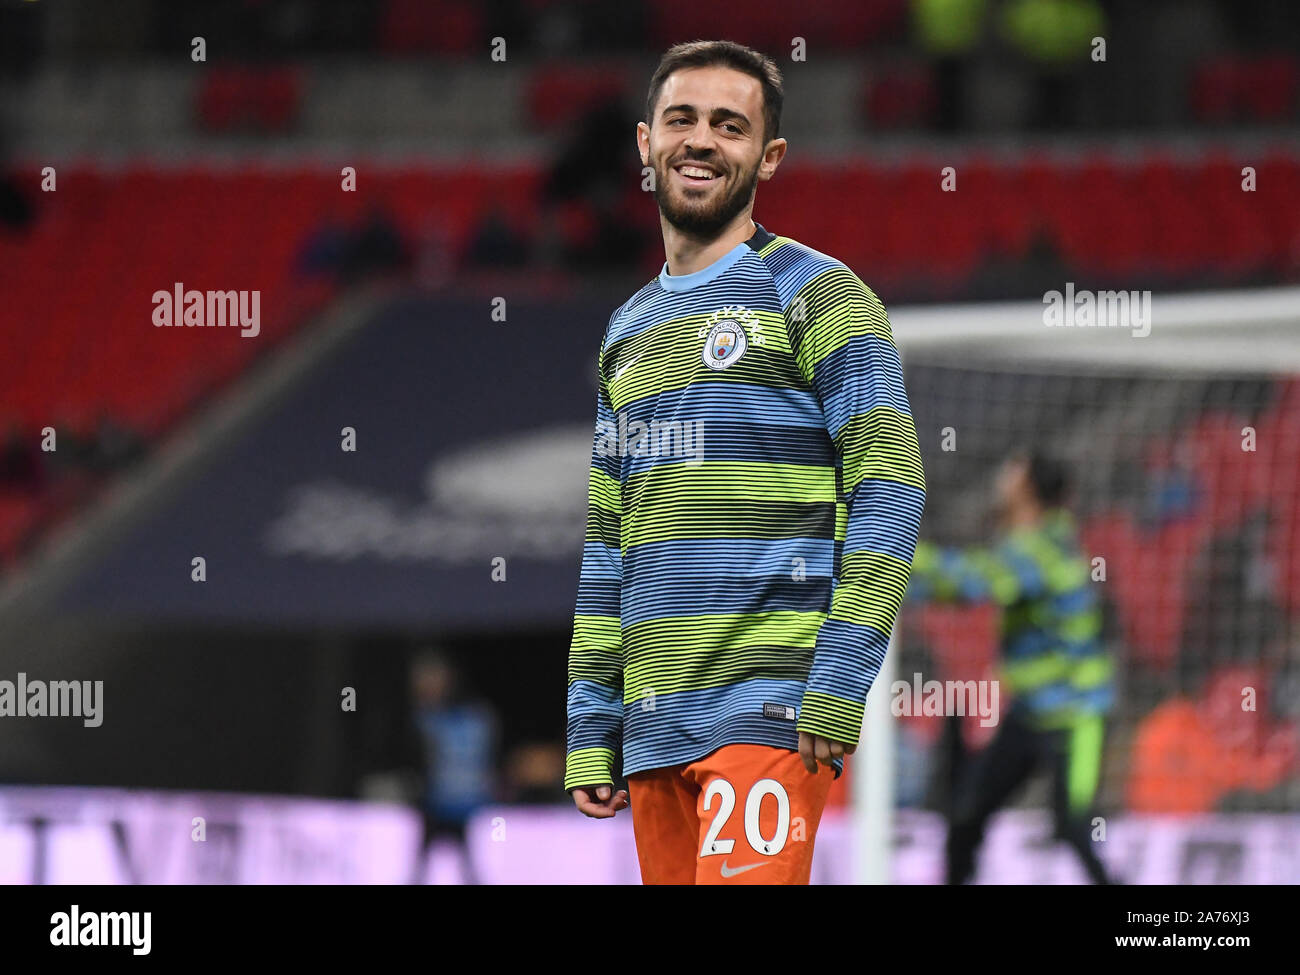 LONDON, ENGLAND - OCTOBER 29, 2018: Bernardo Silva of City pictured prior to the 2018/19 English Premier League game between Tottenham Hotspur and Manchester City at Wembley Stadium. Stock Photo